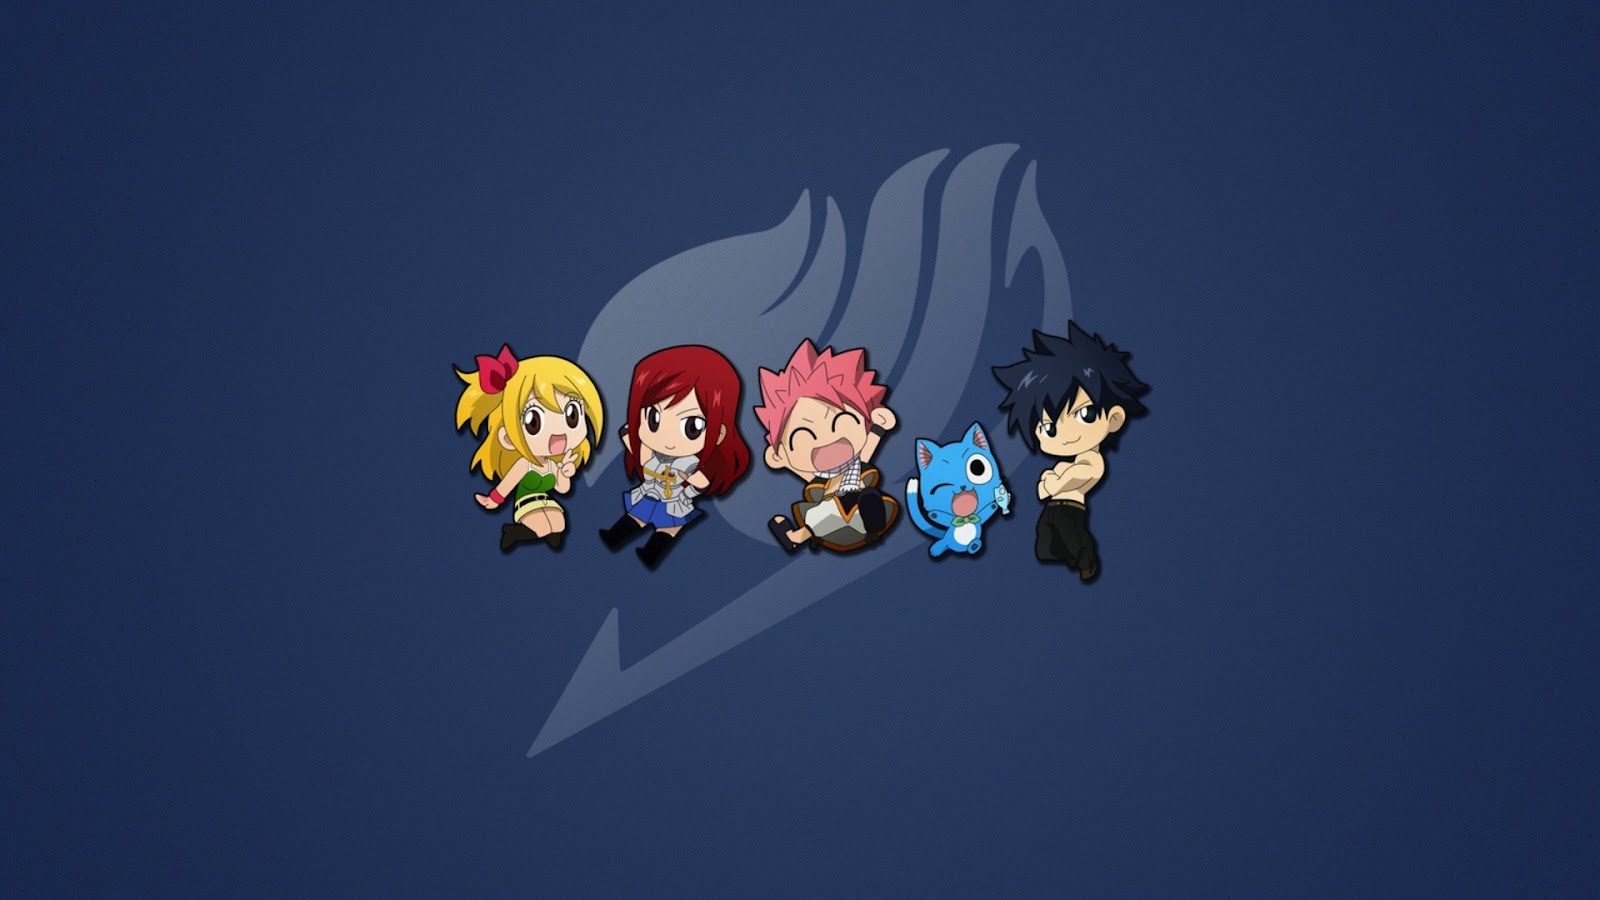 Your Wallpaper Fairy Tail Wallpaper